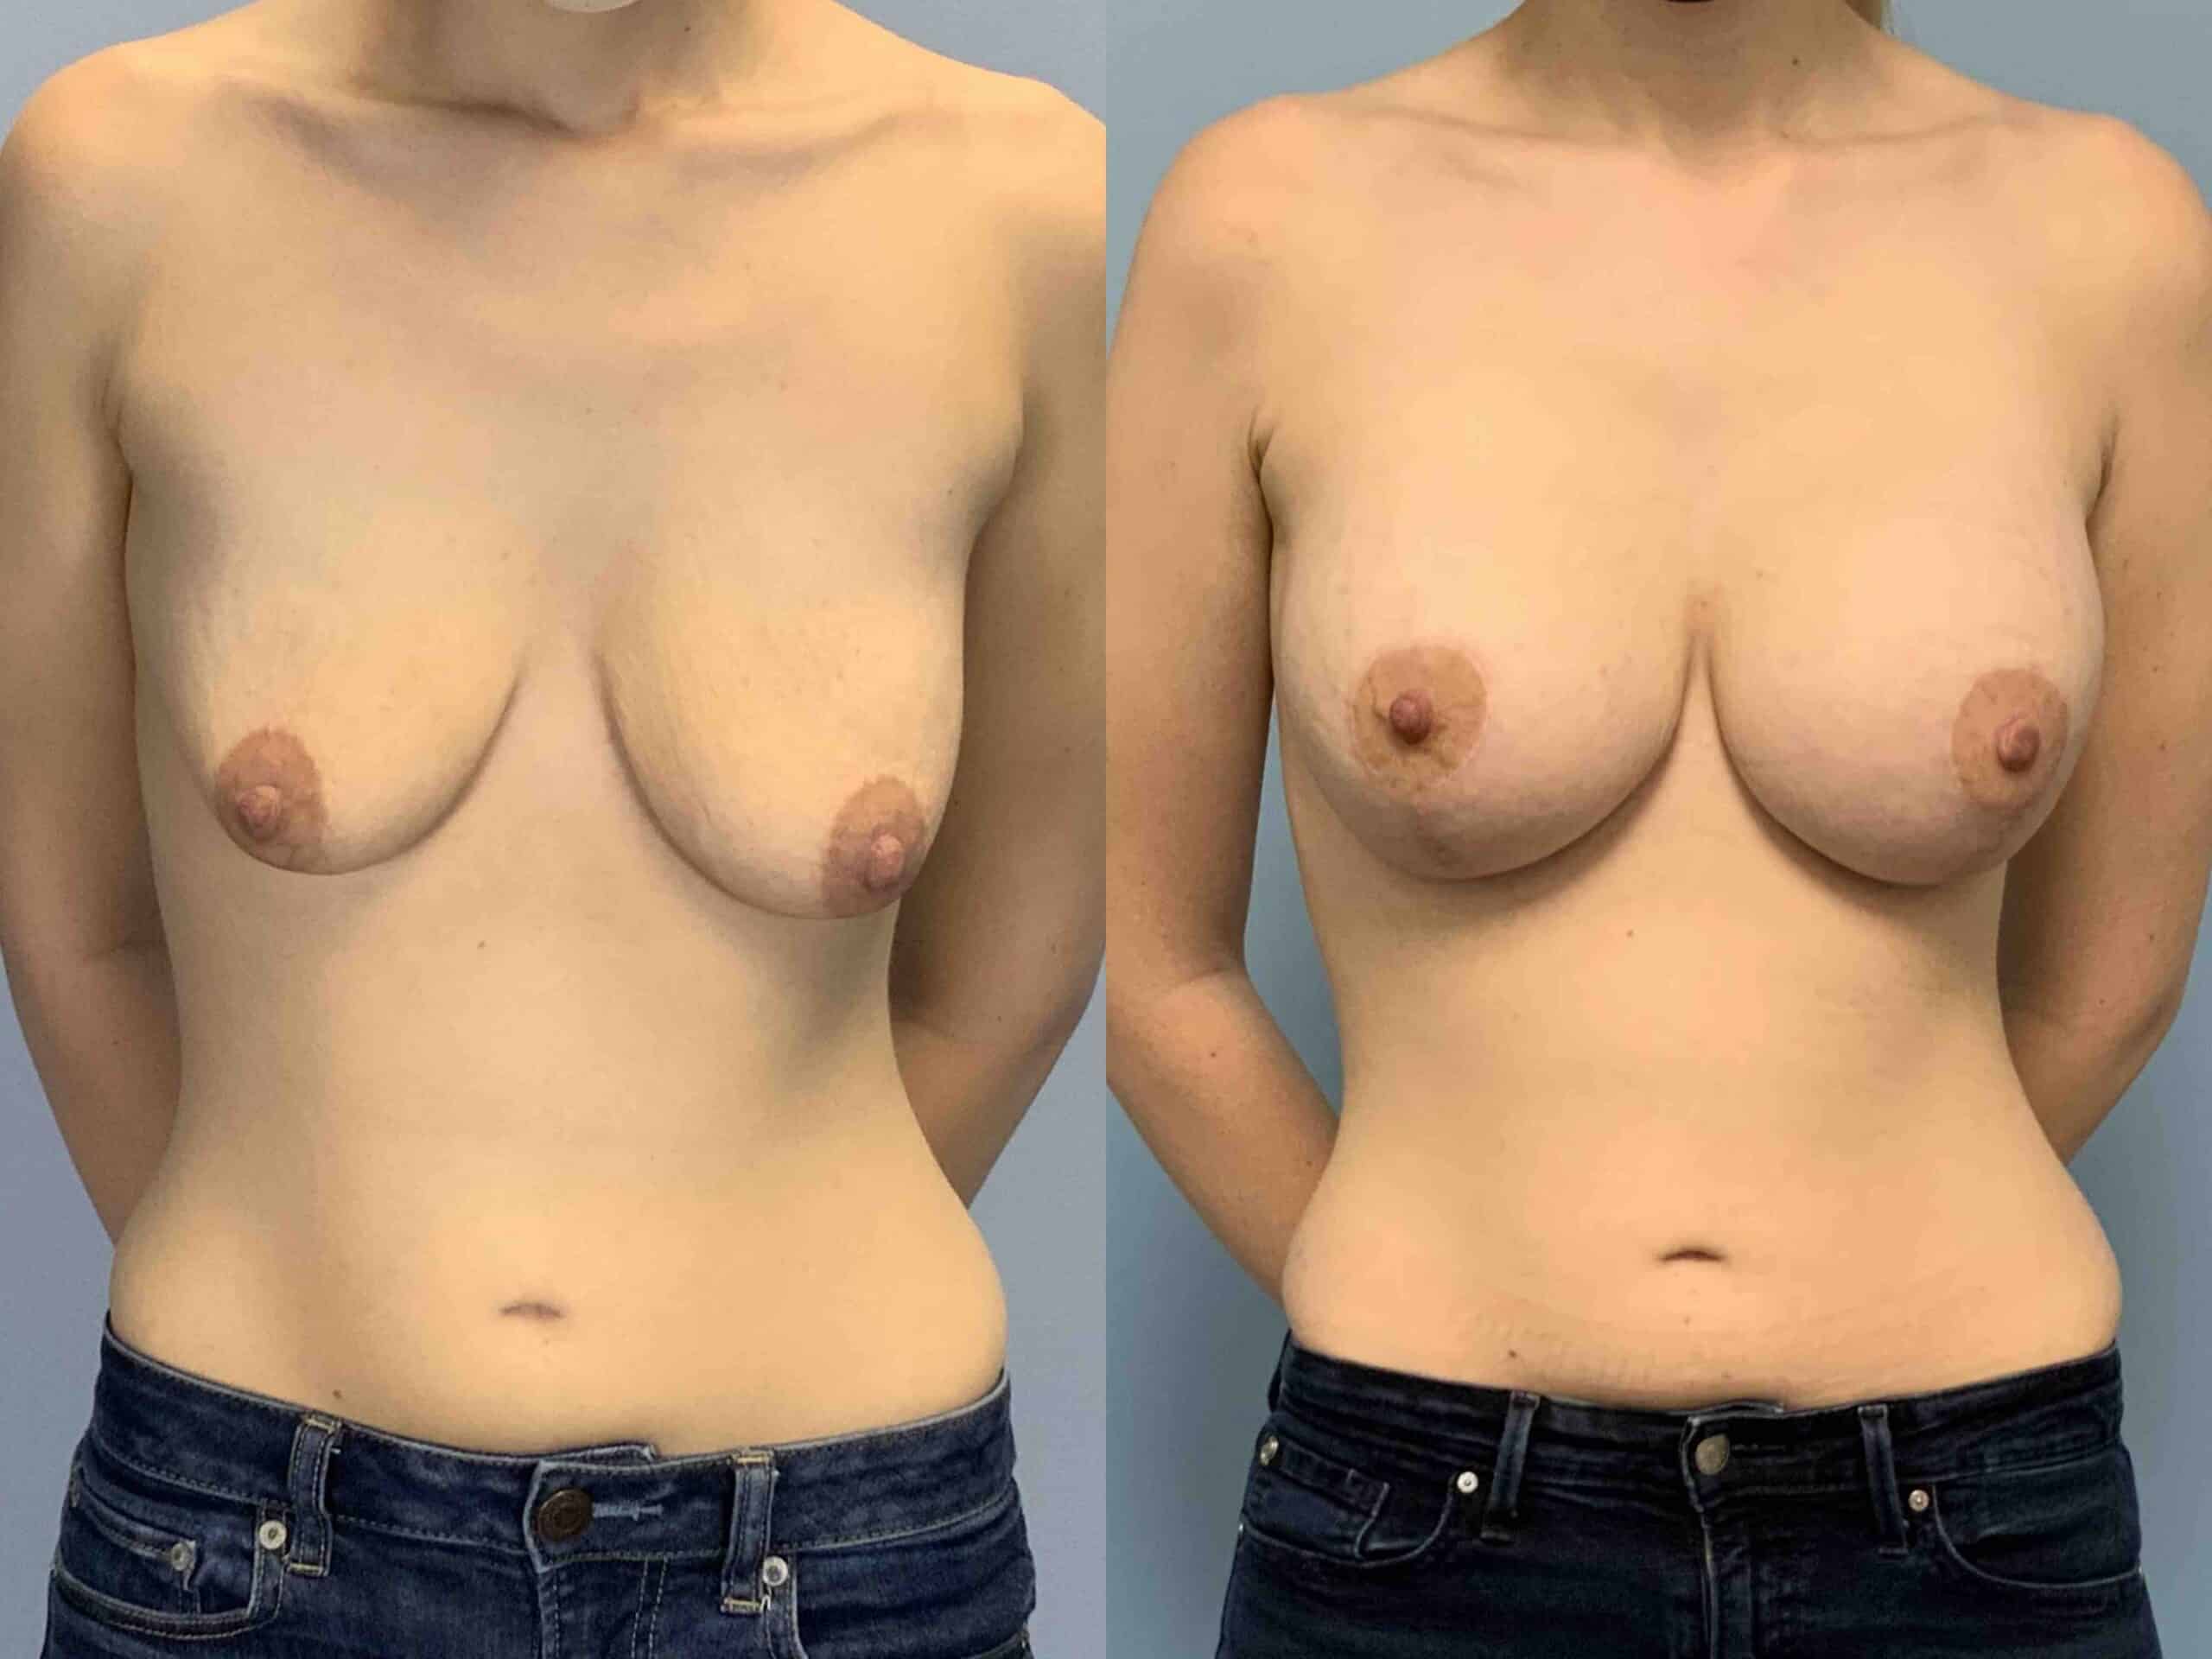 Before and after, 7 mo post op from Breast Augmentation, Strattice, Breast Lift/Mastopexy, performed by Dr. Paul Vanek (front view)